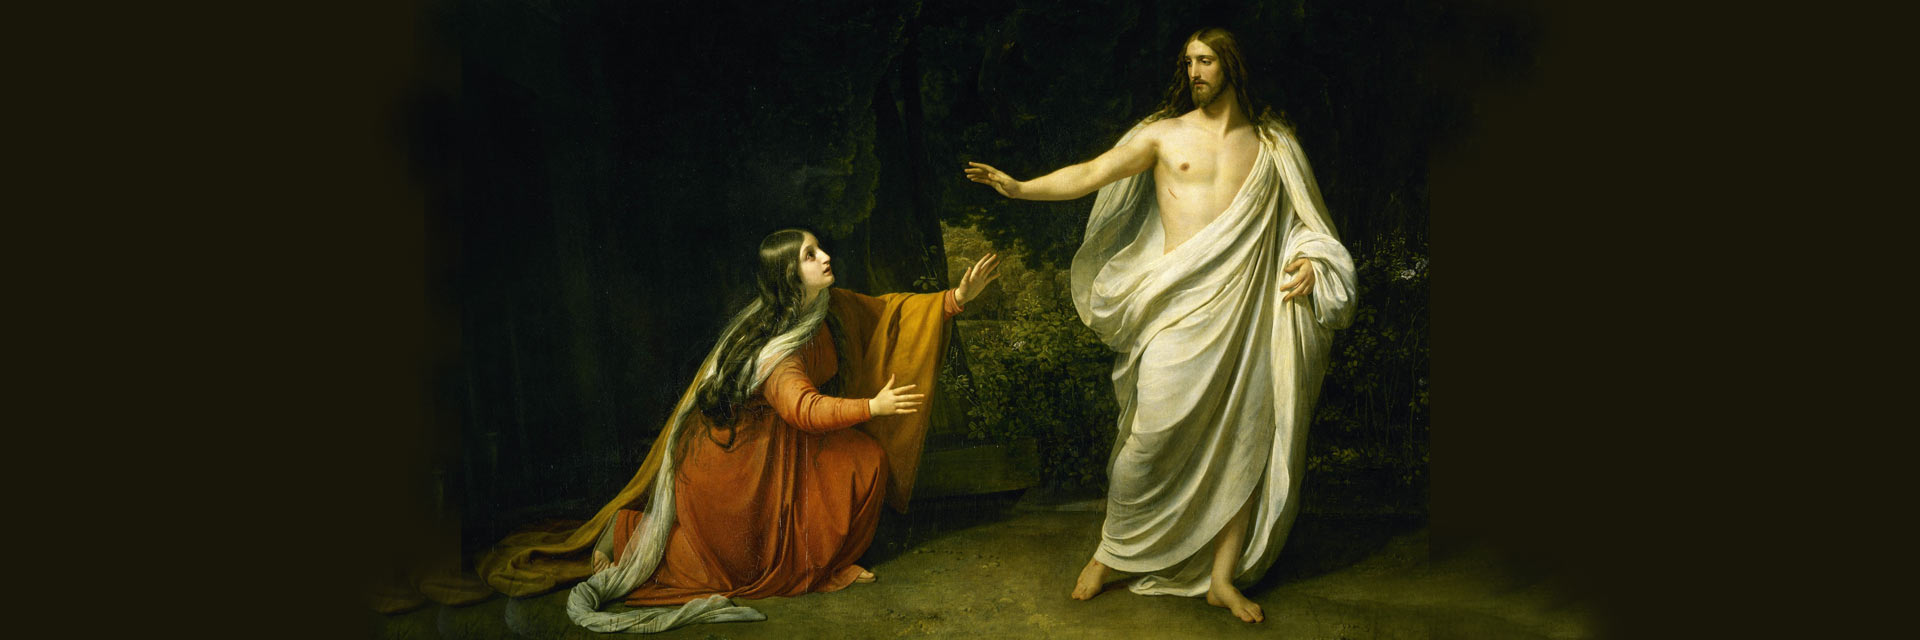 Discovering the True Simplicity of Sainthood with St. Mary Magdalene and Mother Seton